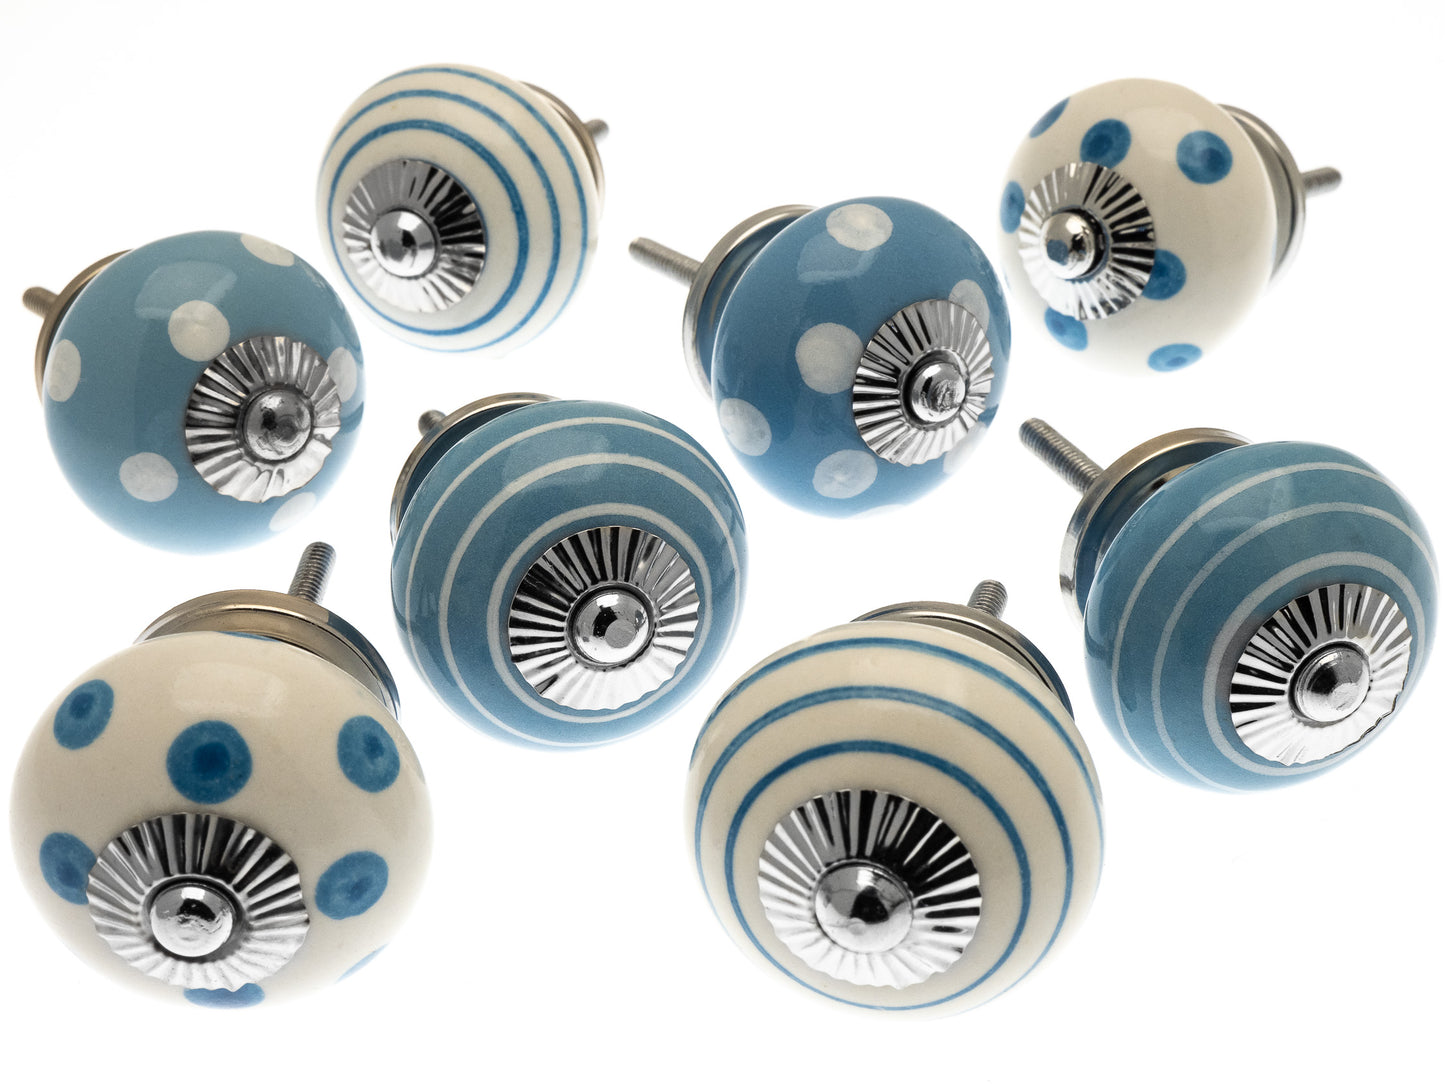 Ceramic Door Knobs in Pale Blue - Hand Painted Dots  (Set of 8)